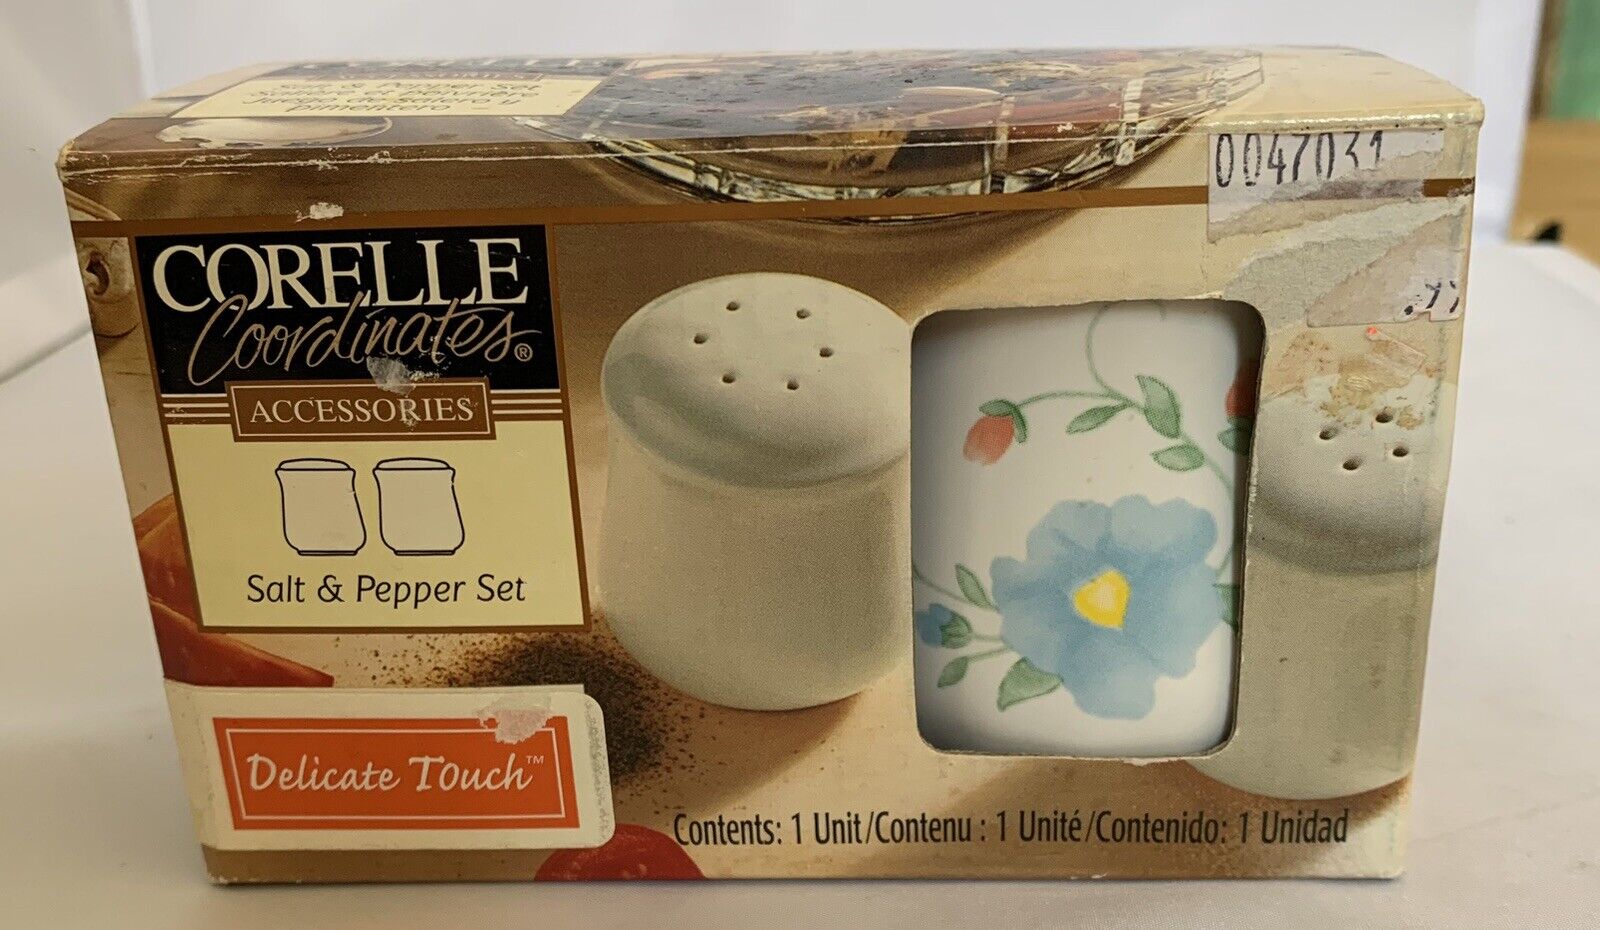 Corelle Coordinates “Delicate Touch” Salt & Pepper Shakers With Box Vintage